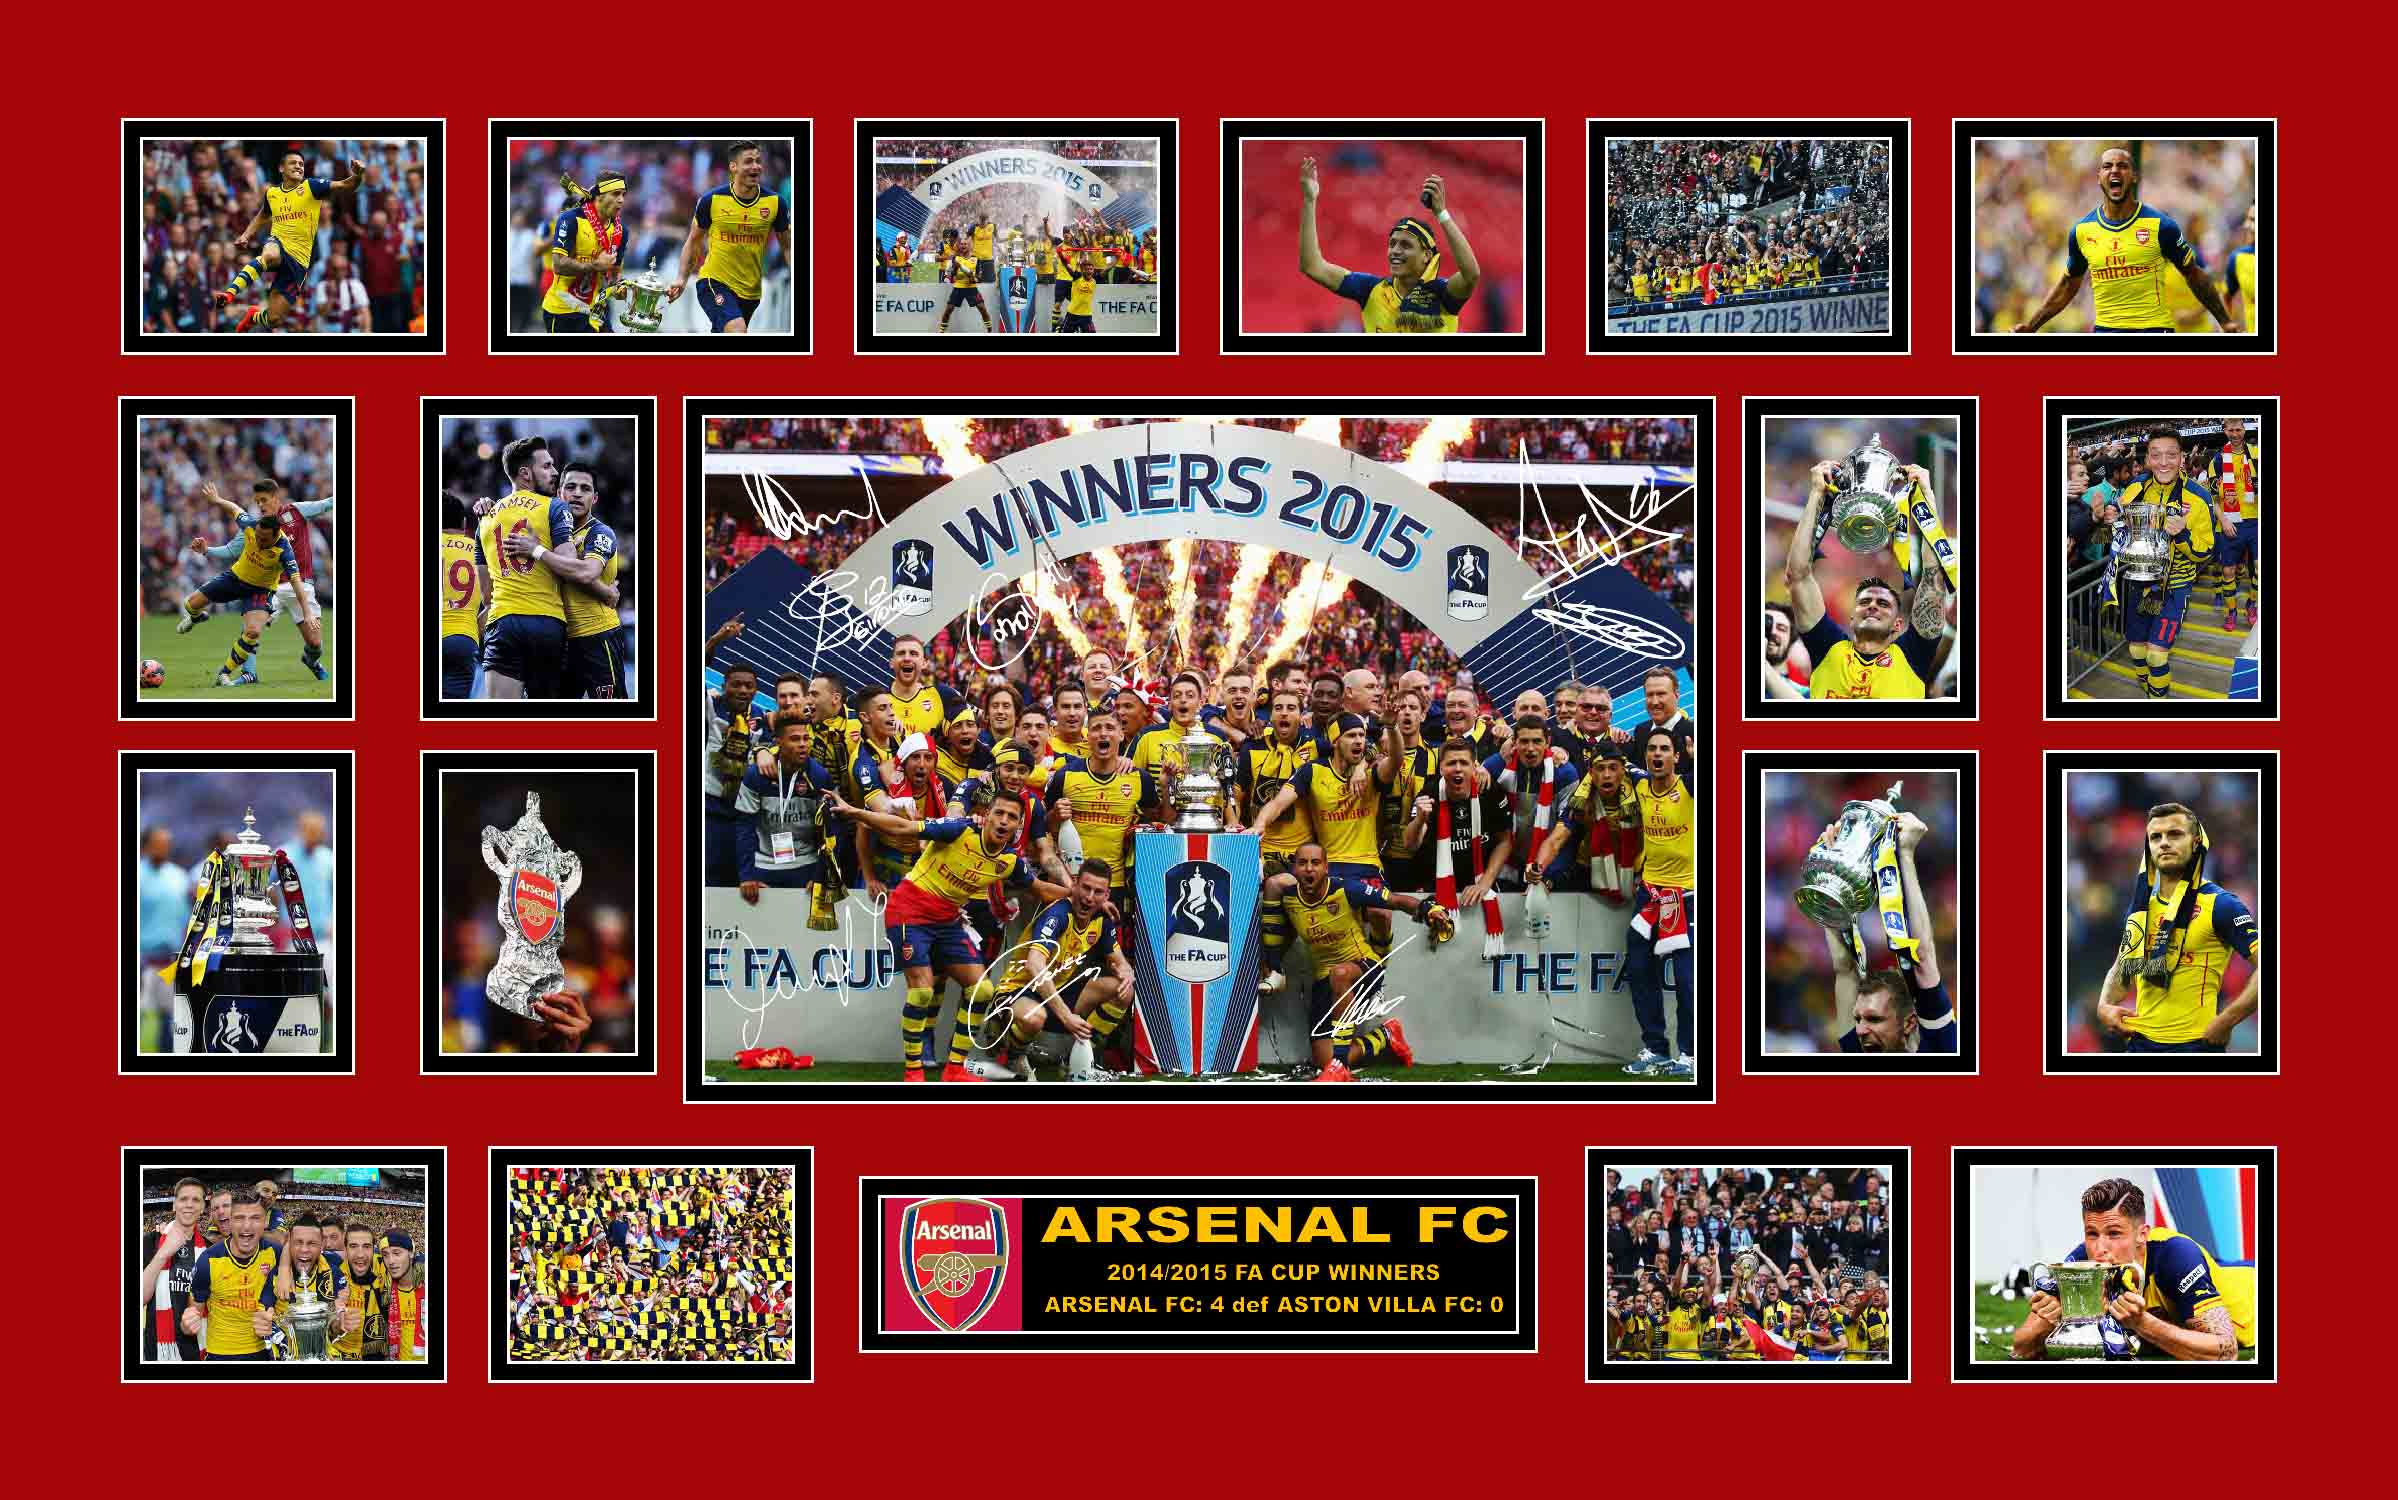 Arsenal 2014/2015 FA Cup Winners Collage Framed - KING CAVE